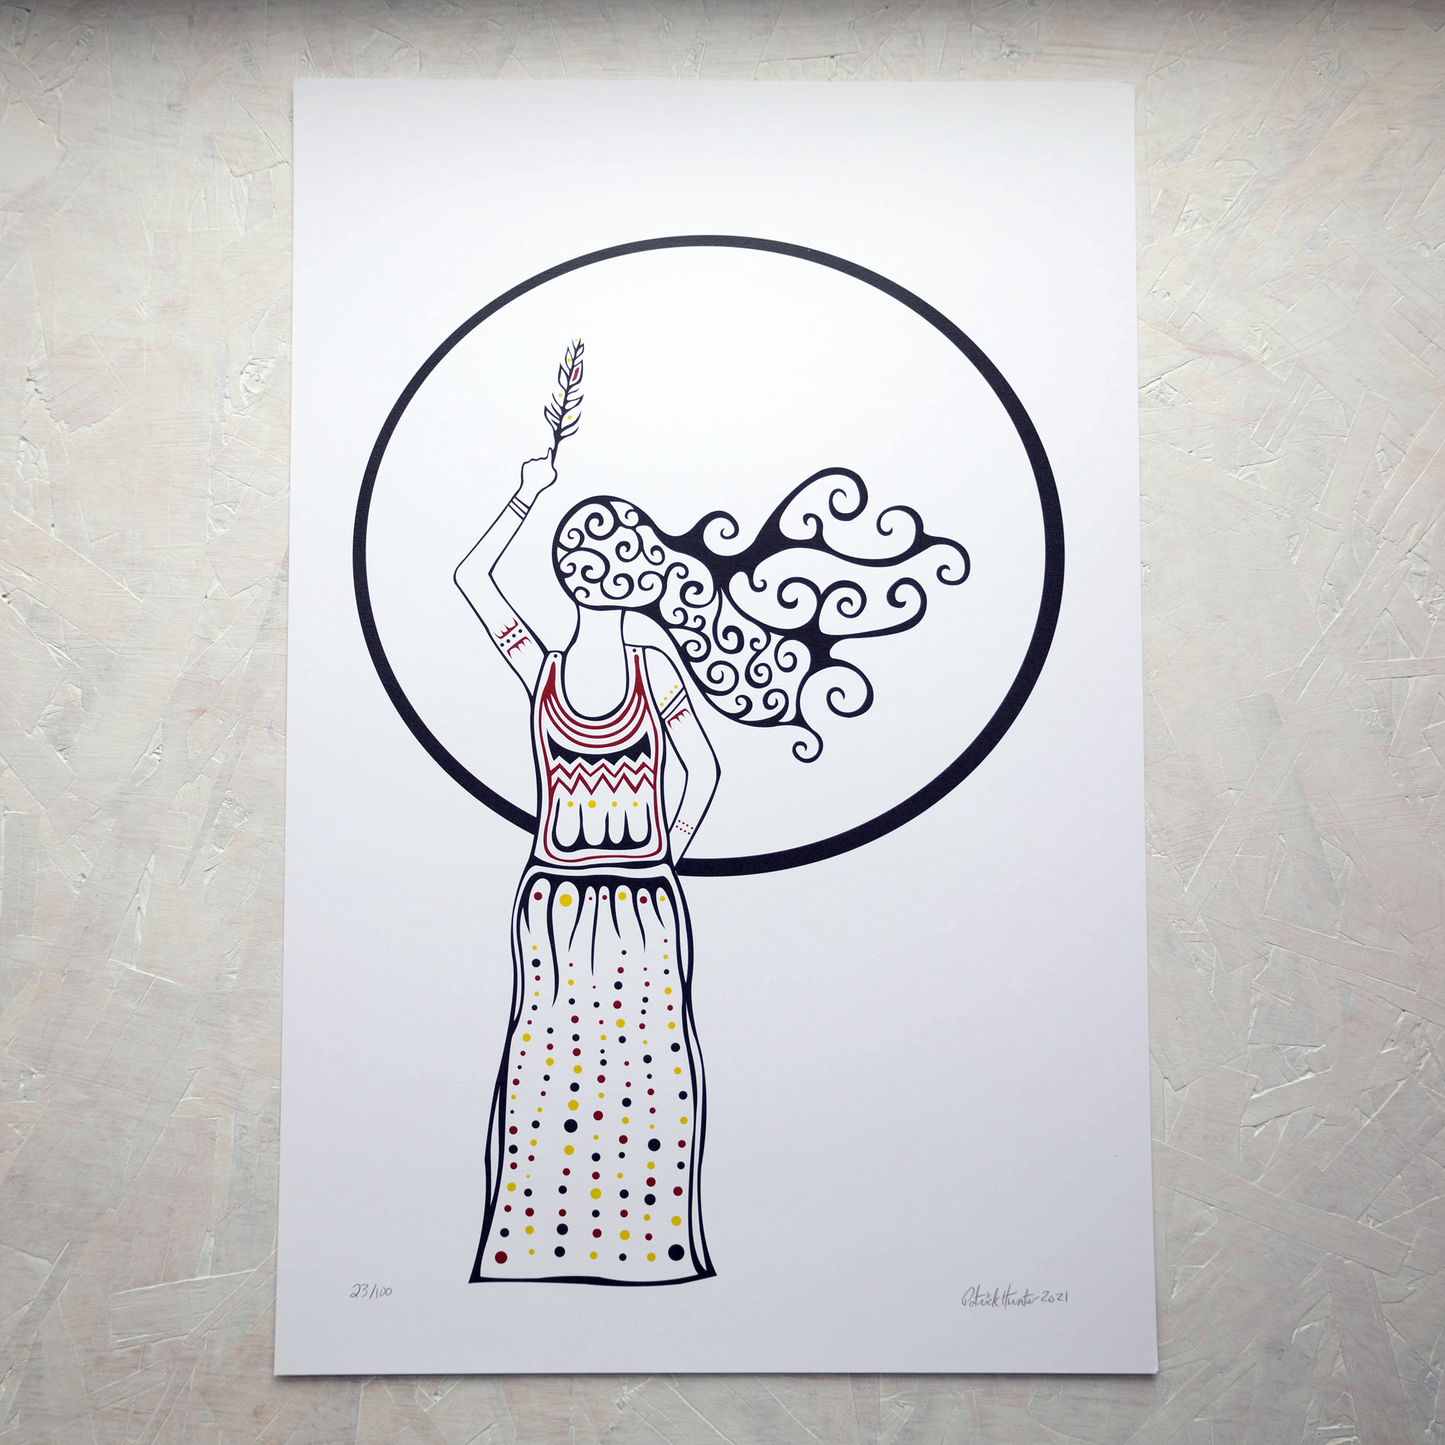 Print of Patrick Hunter's painting of a woman raising a feather up in front of a full moon, simplified black on white with some colour highlights, woodland art style.